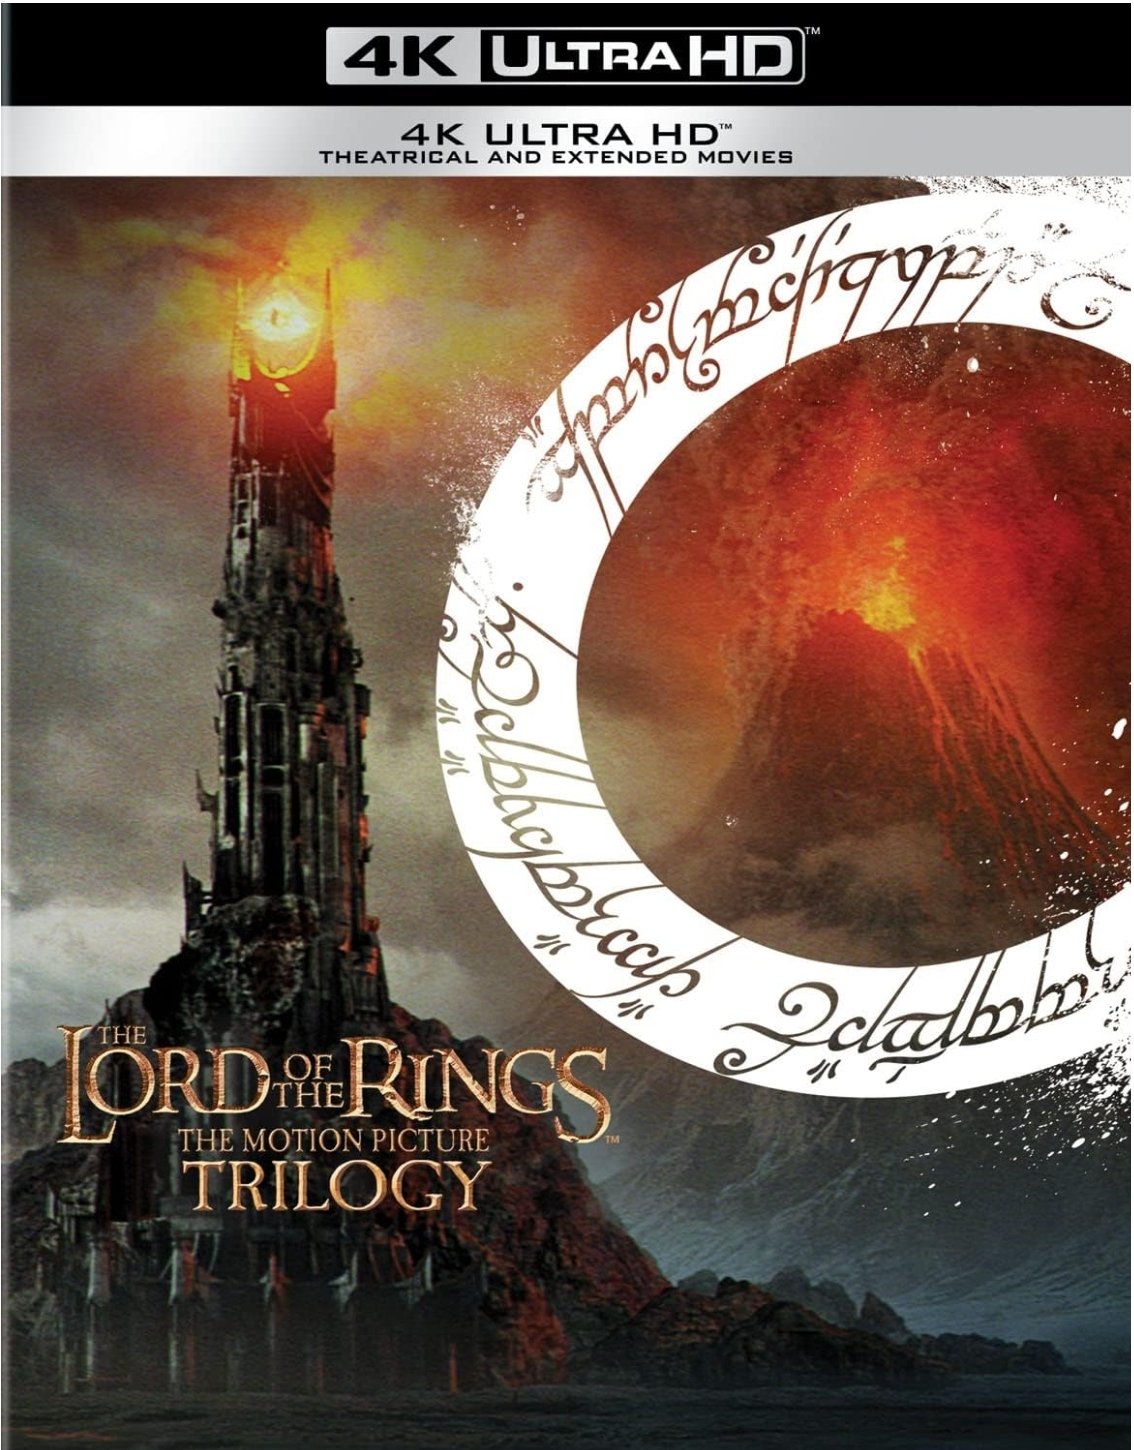 THE LORD OF THE RING TRILOGY BLU-RAY 4K